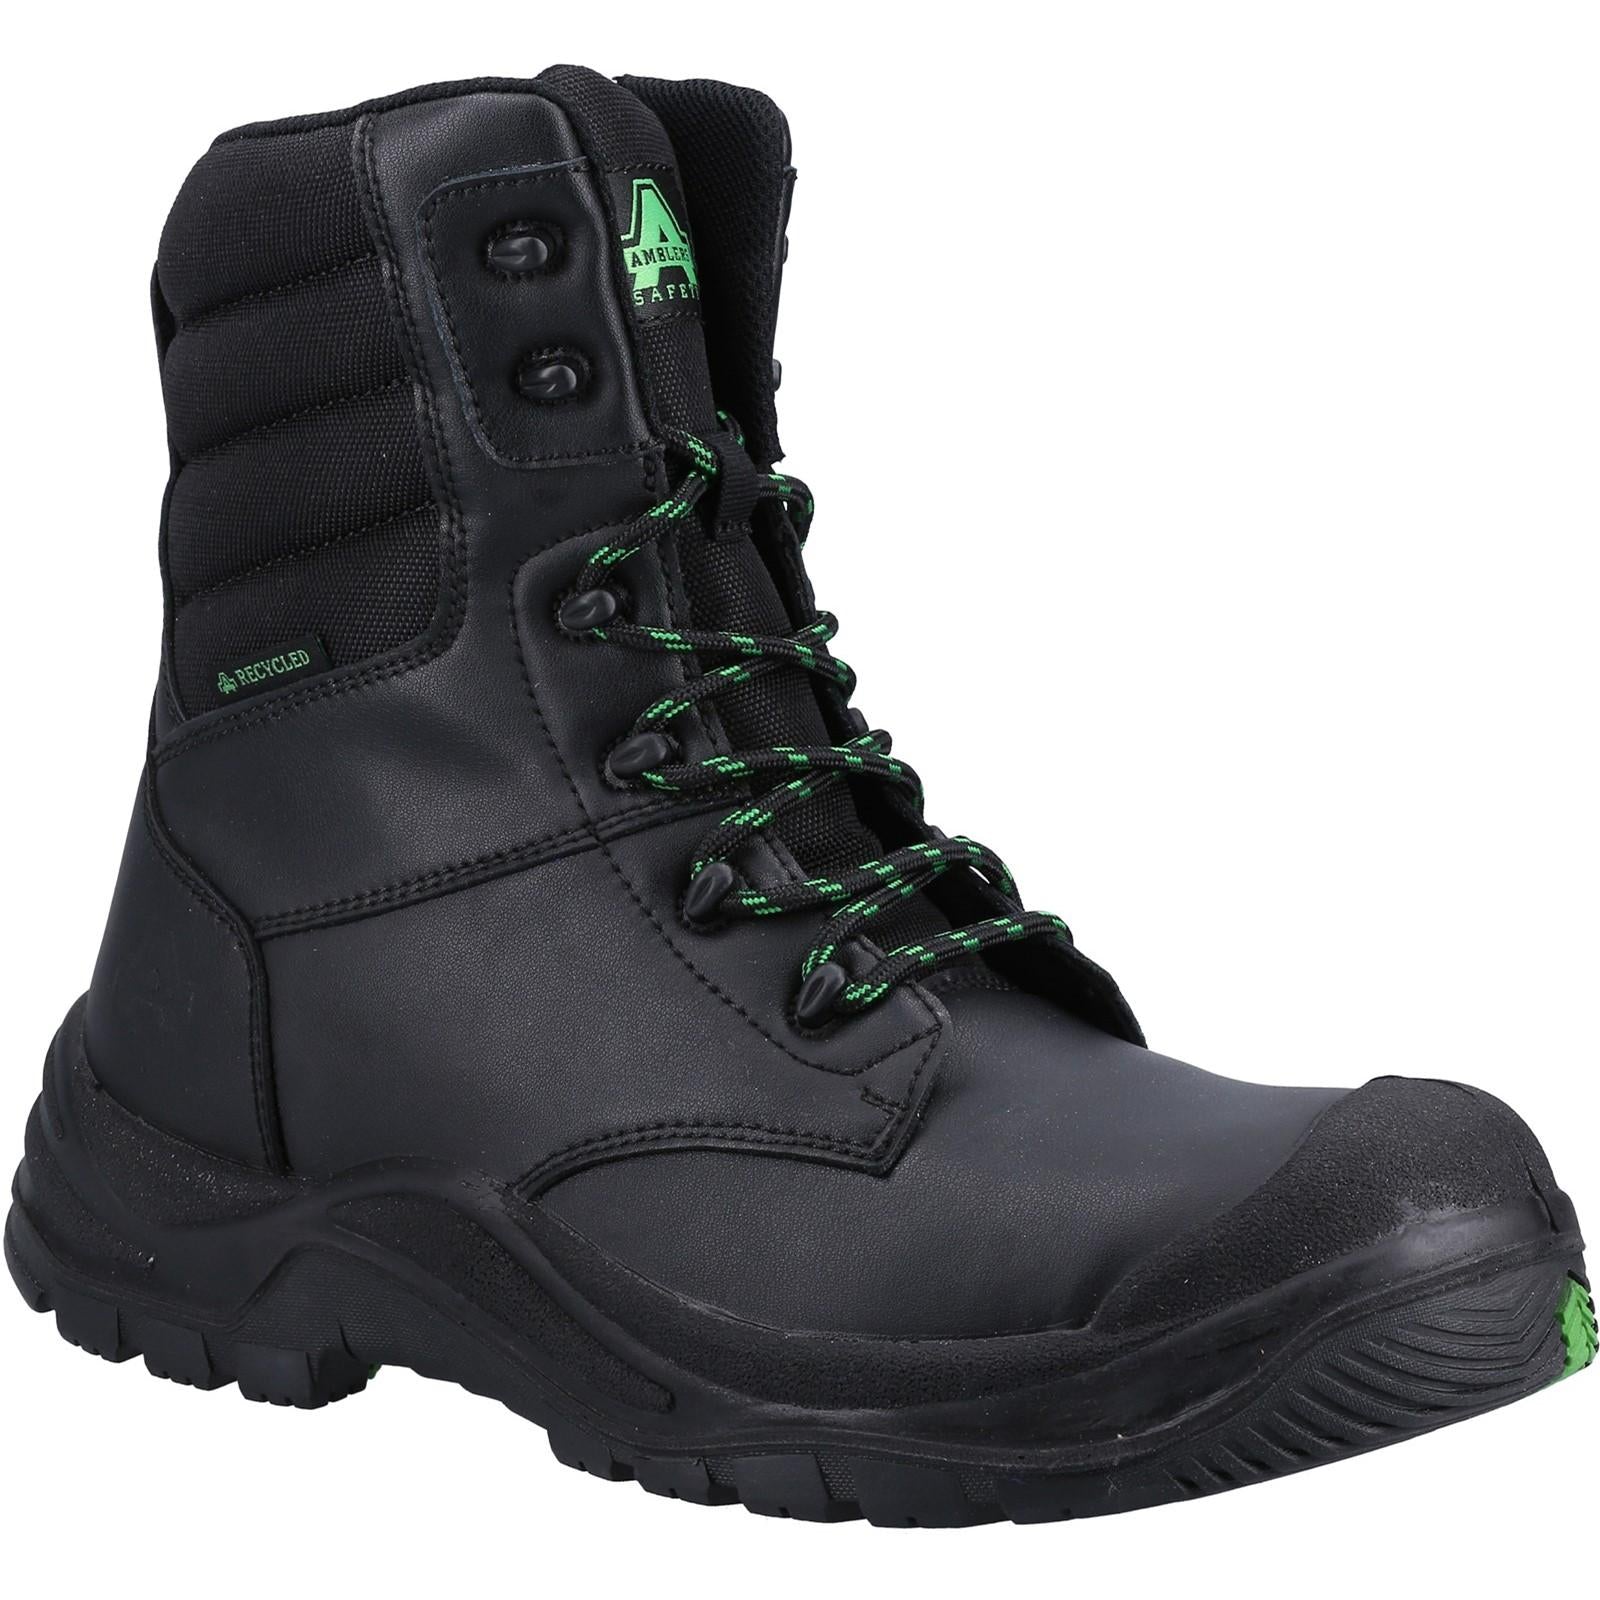 Amblers Safety 503 Safety Boots